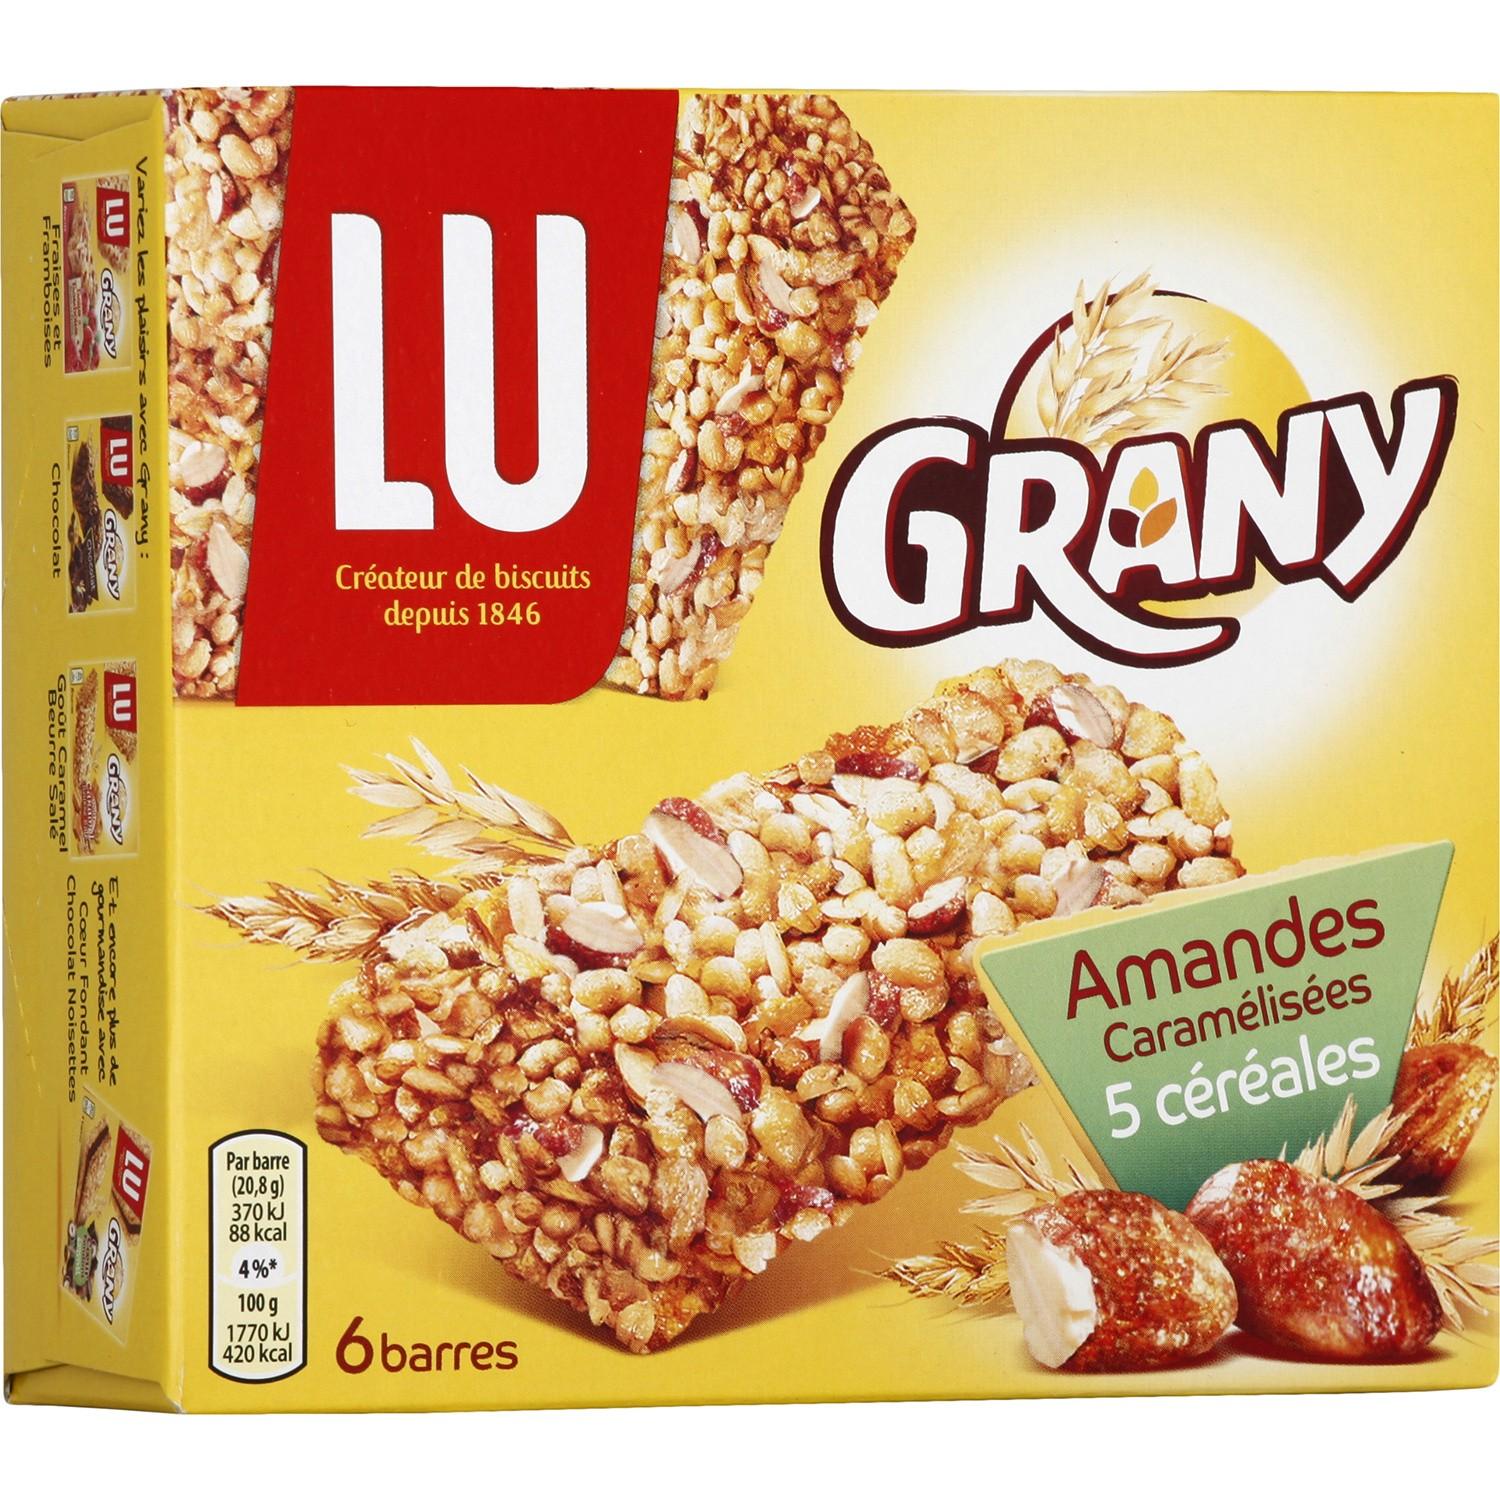 Grany Cereal / Almond Bars | Buy Online | My French Grocery